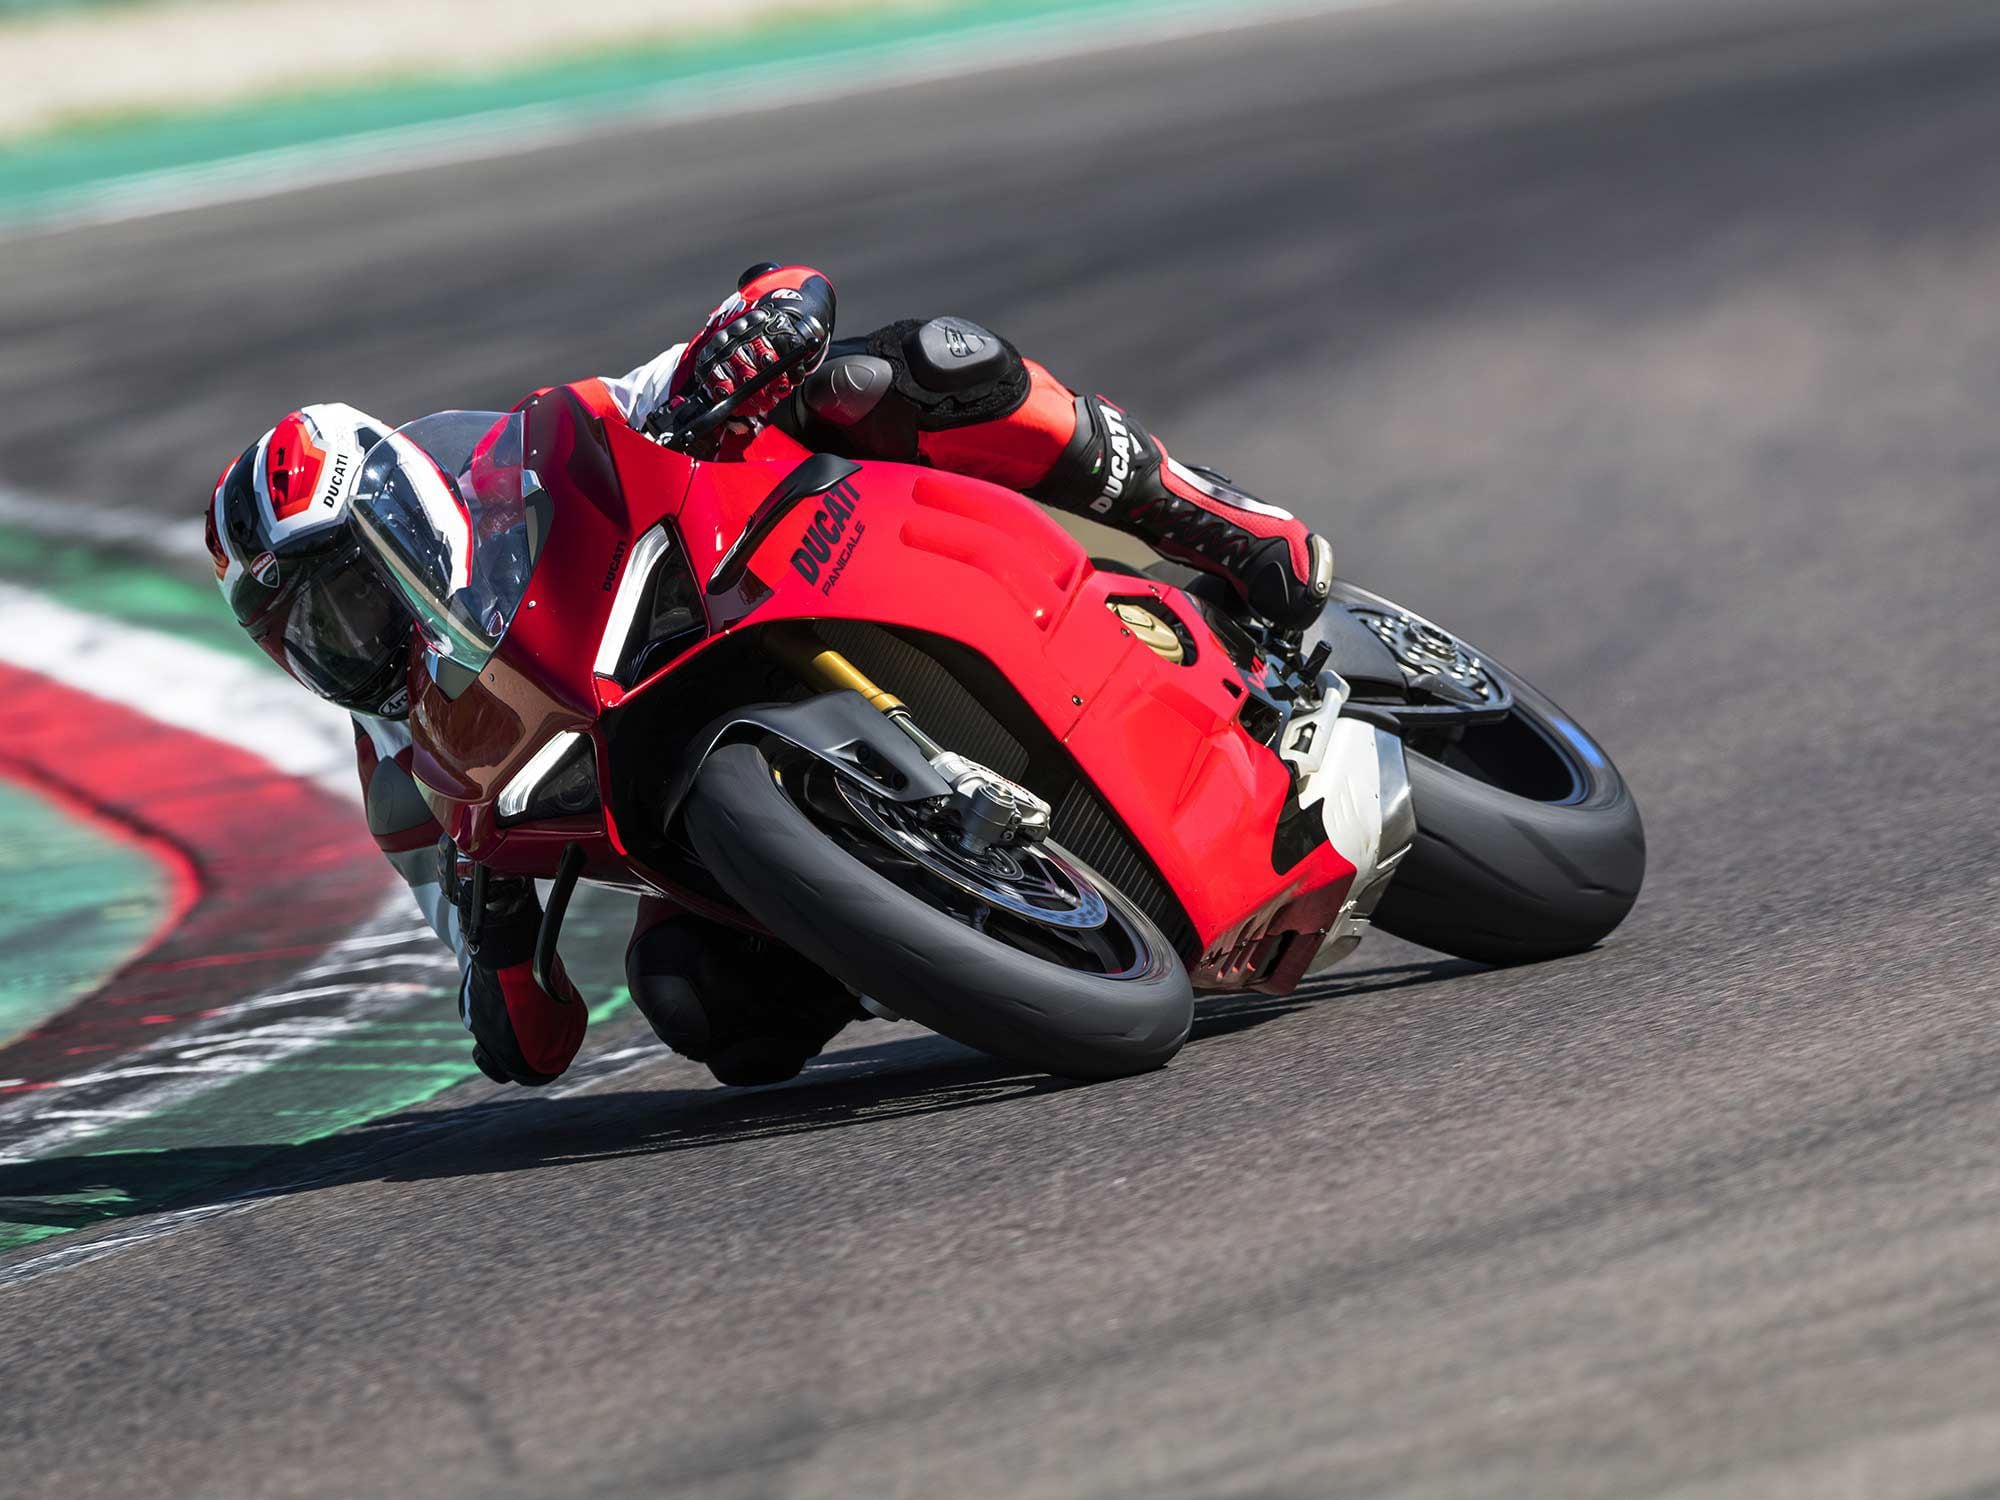 Leaned over hard and on the gas, a natural environment for Ducati’s new 2022 Panigale V4 S. Ducati skipped EICMA, but our European editor gets the story anyway.